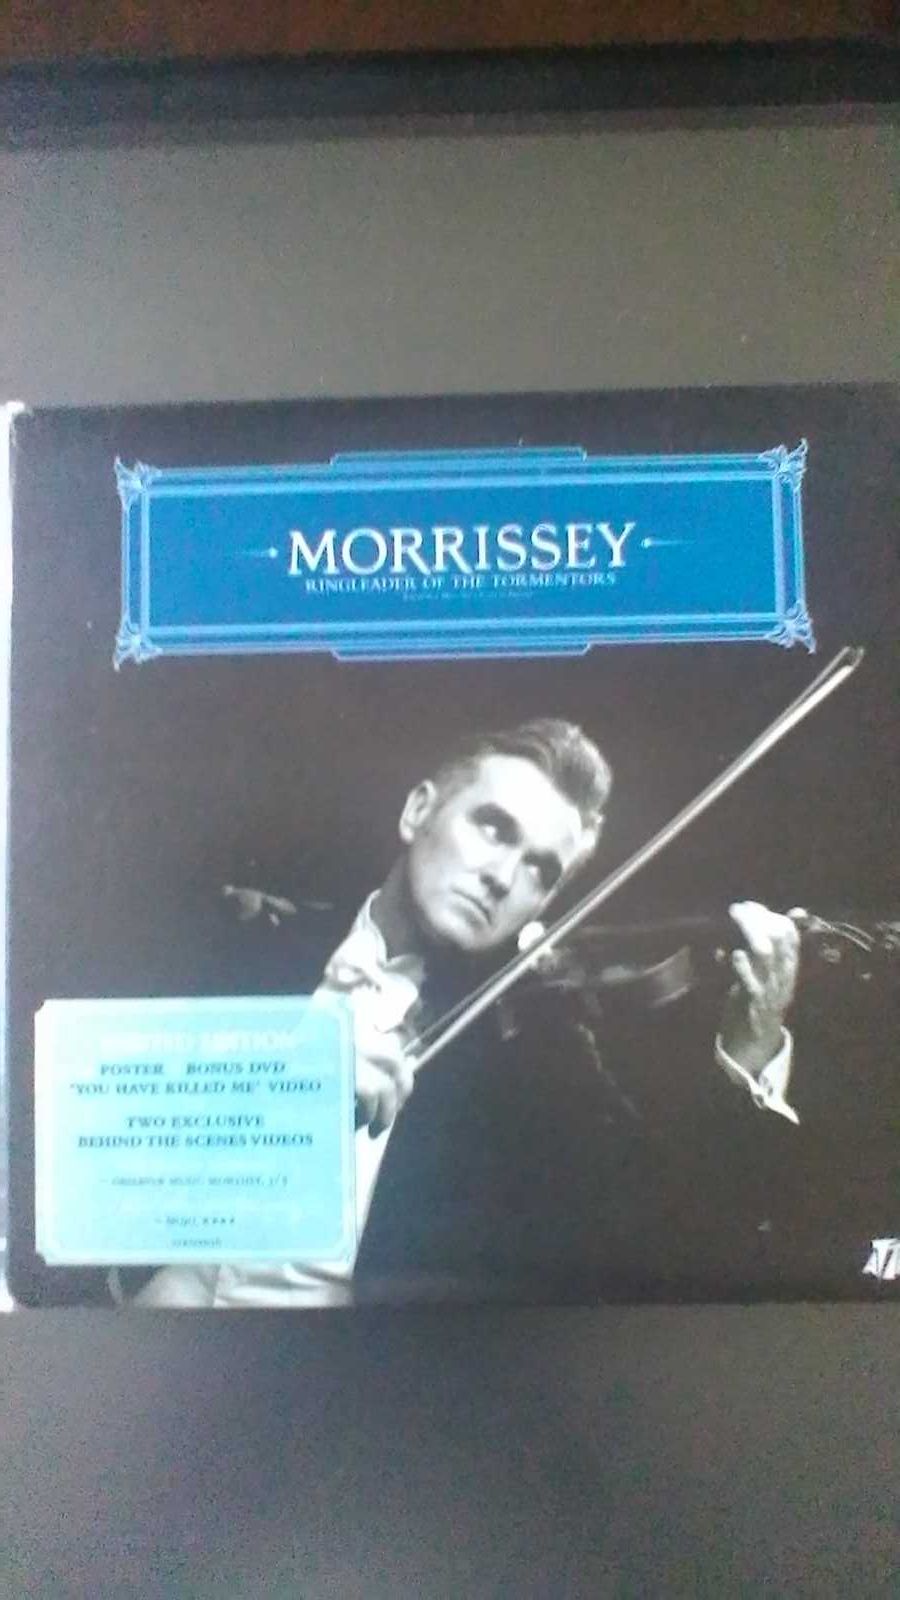 MORRISSEY--Ringleader of the Tormentores CD + DVD Limited Edition